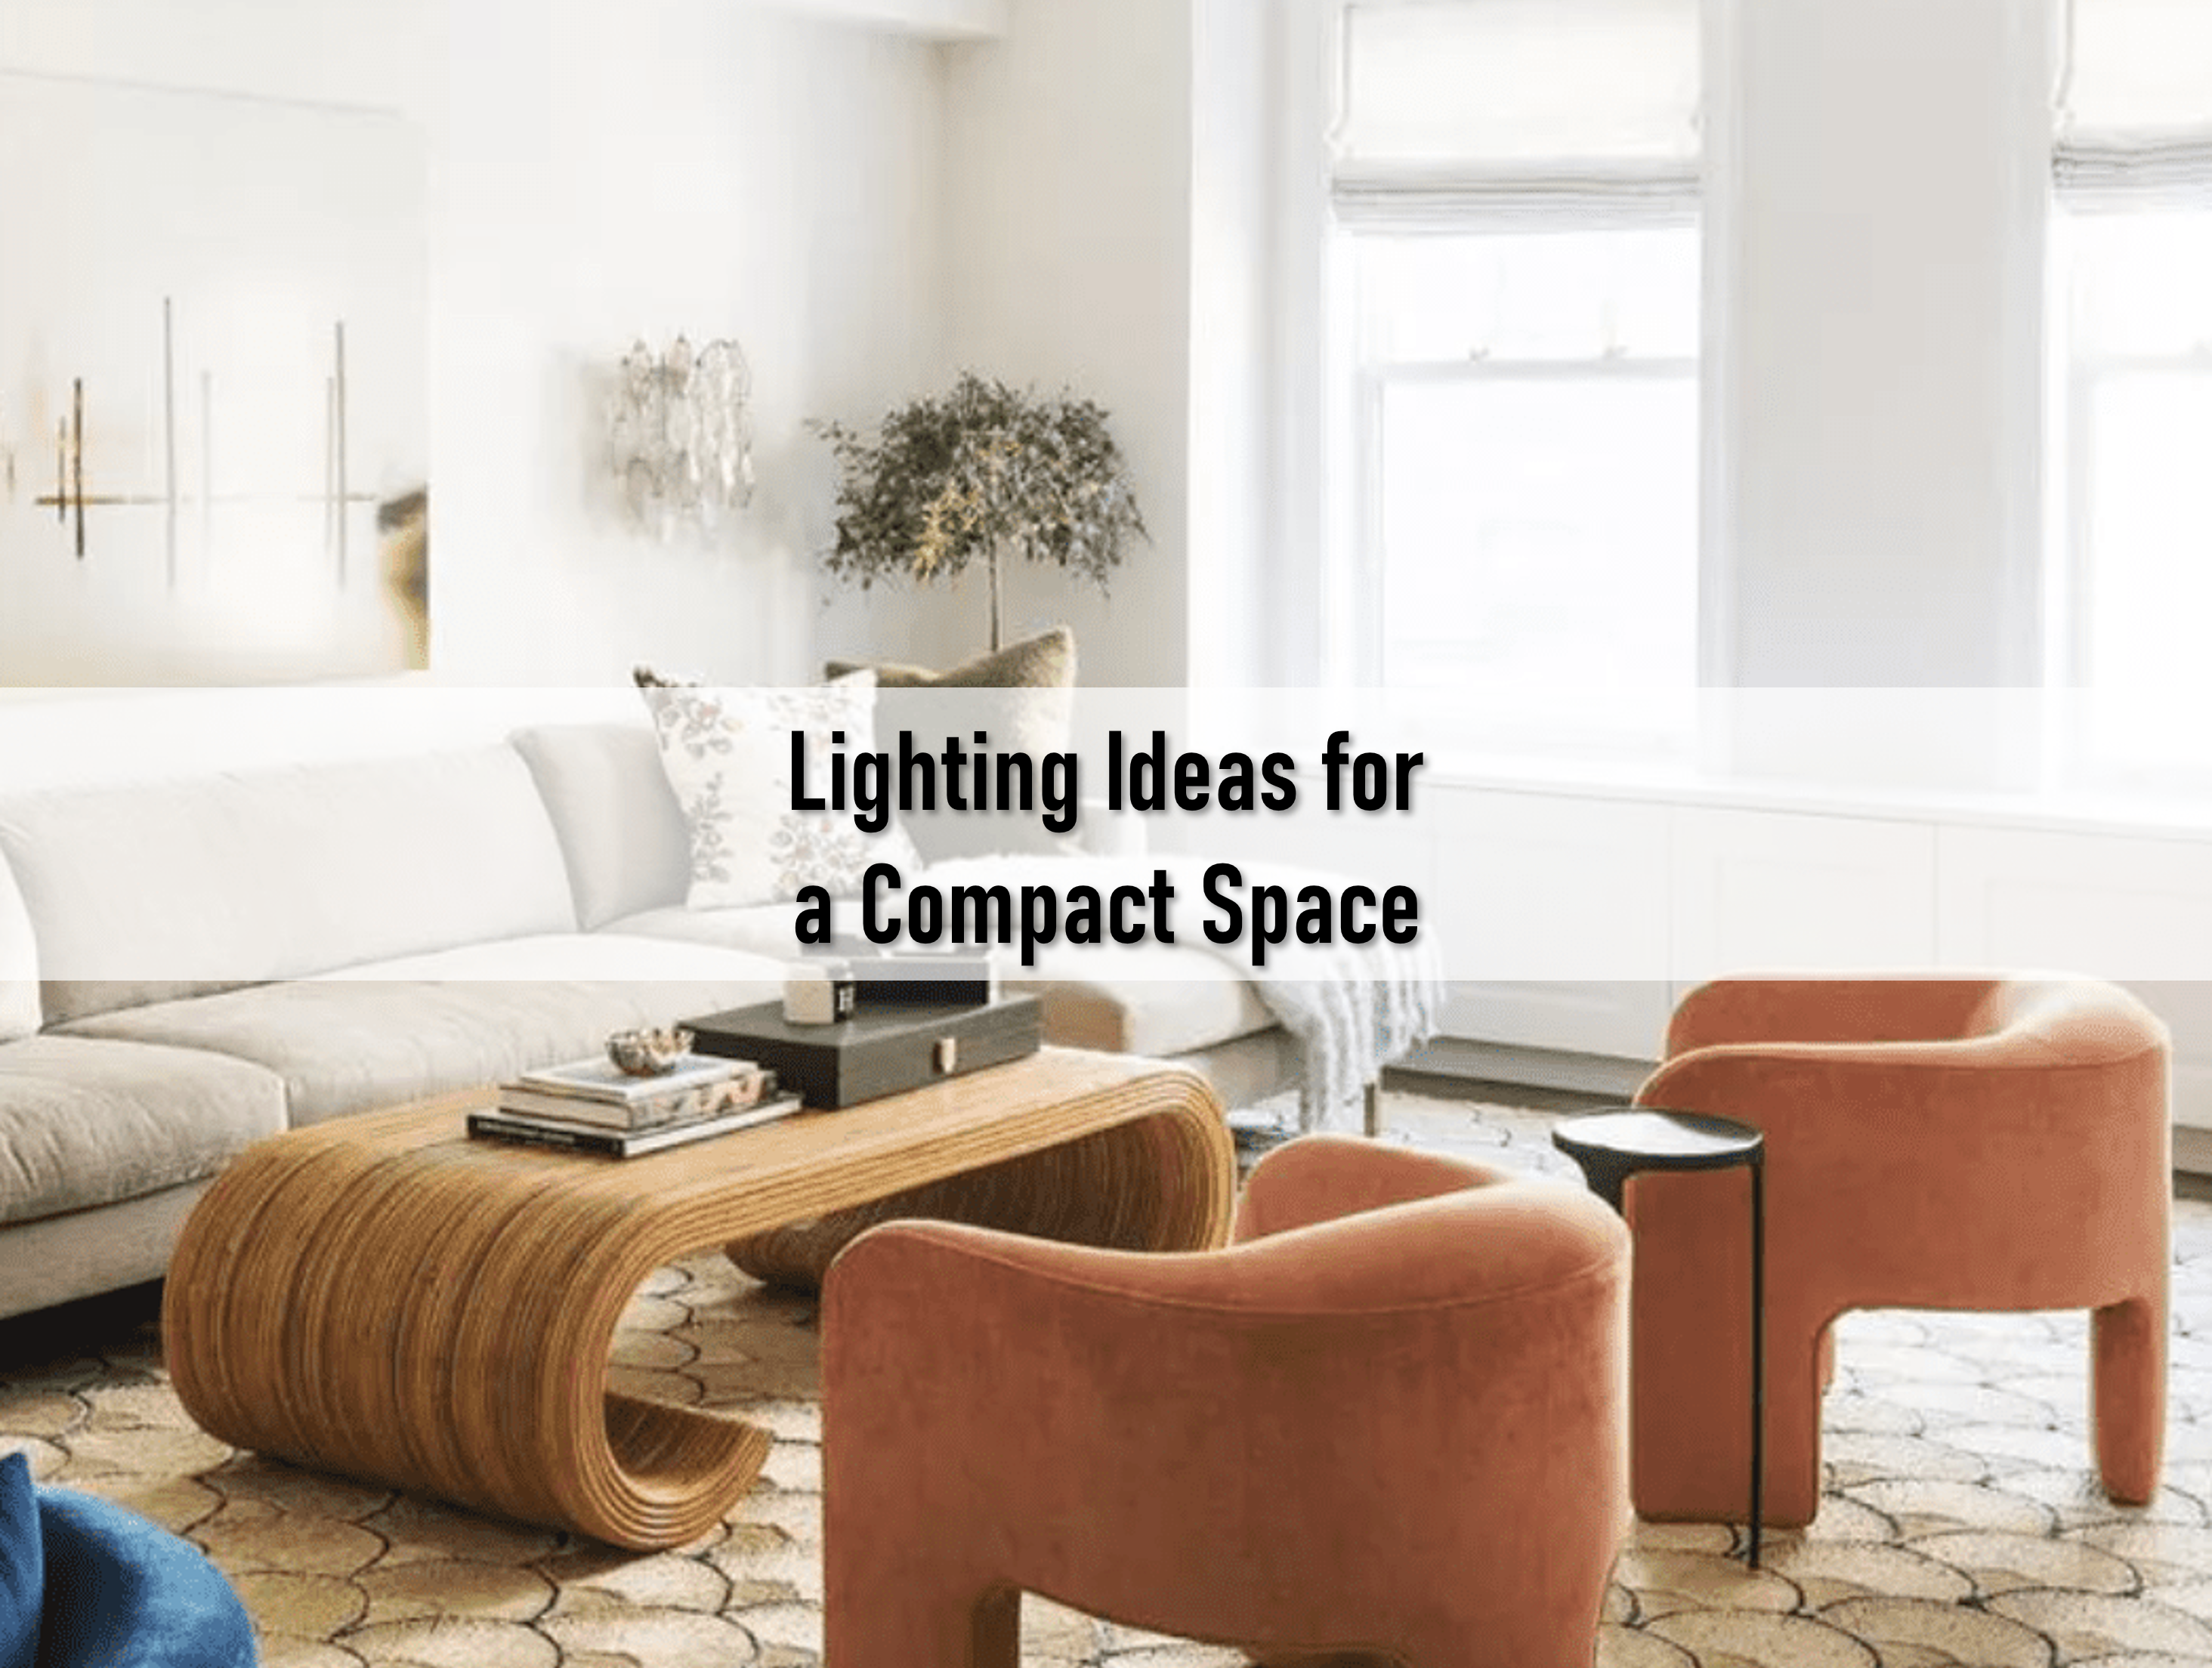 Lighting Ideas for a Compact Space